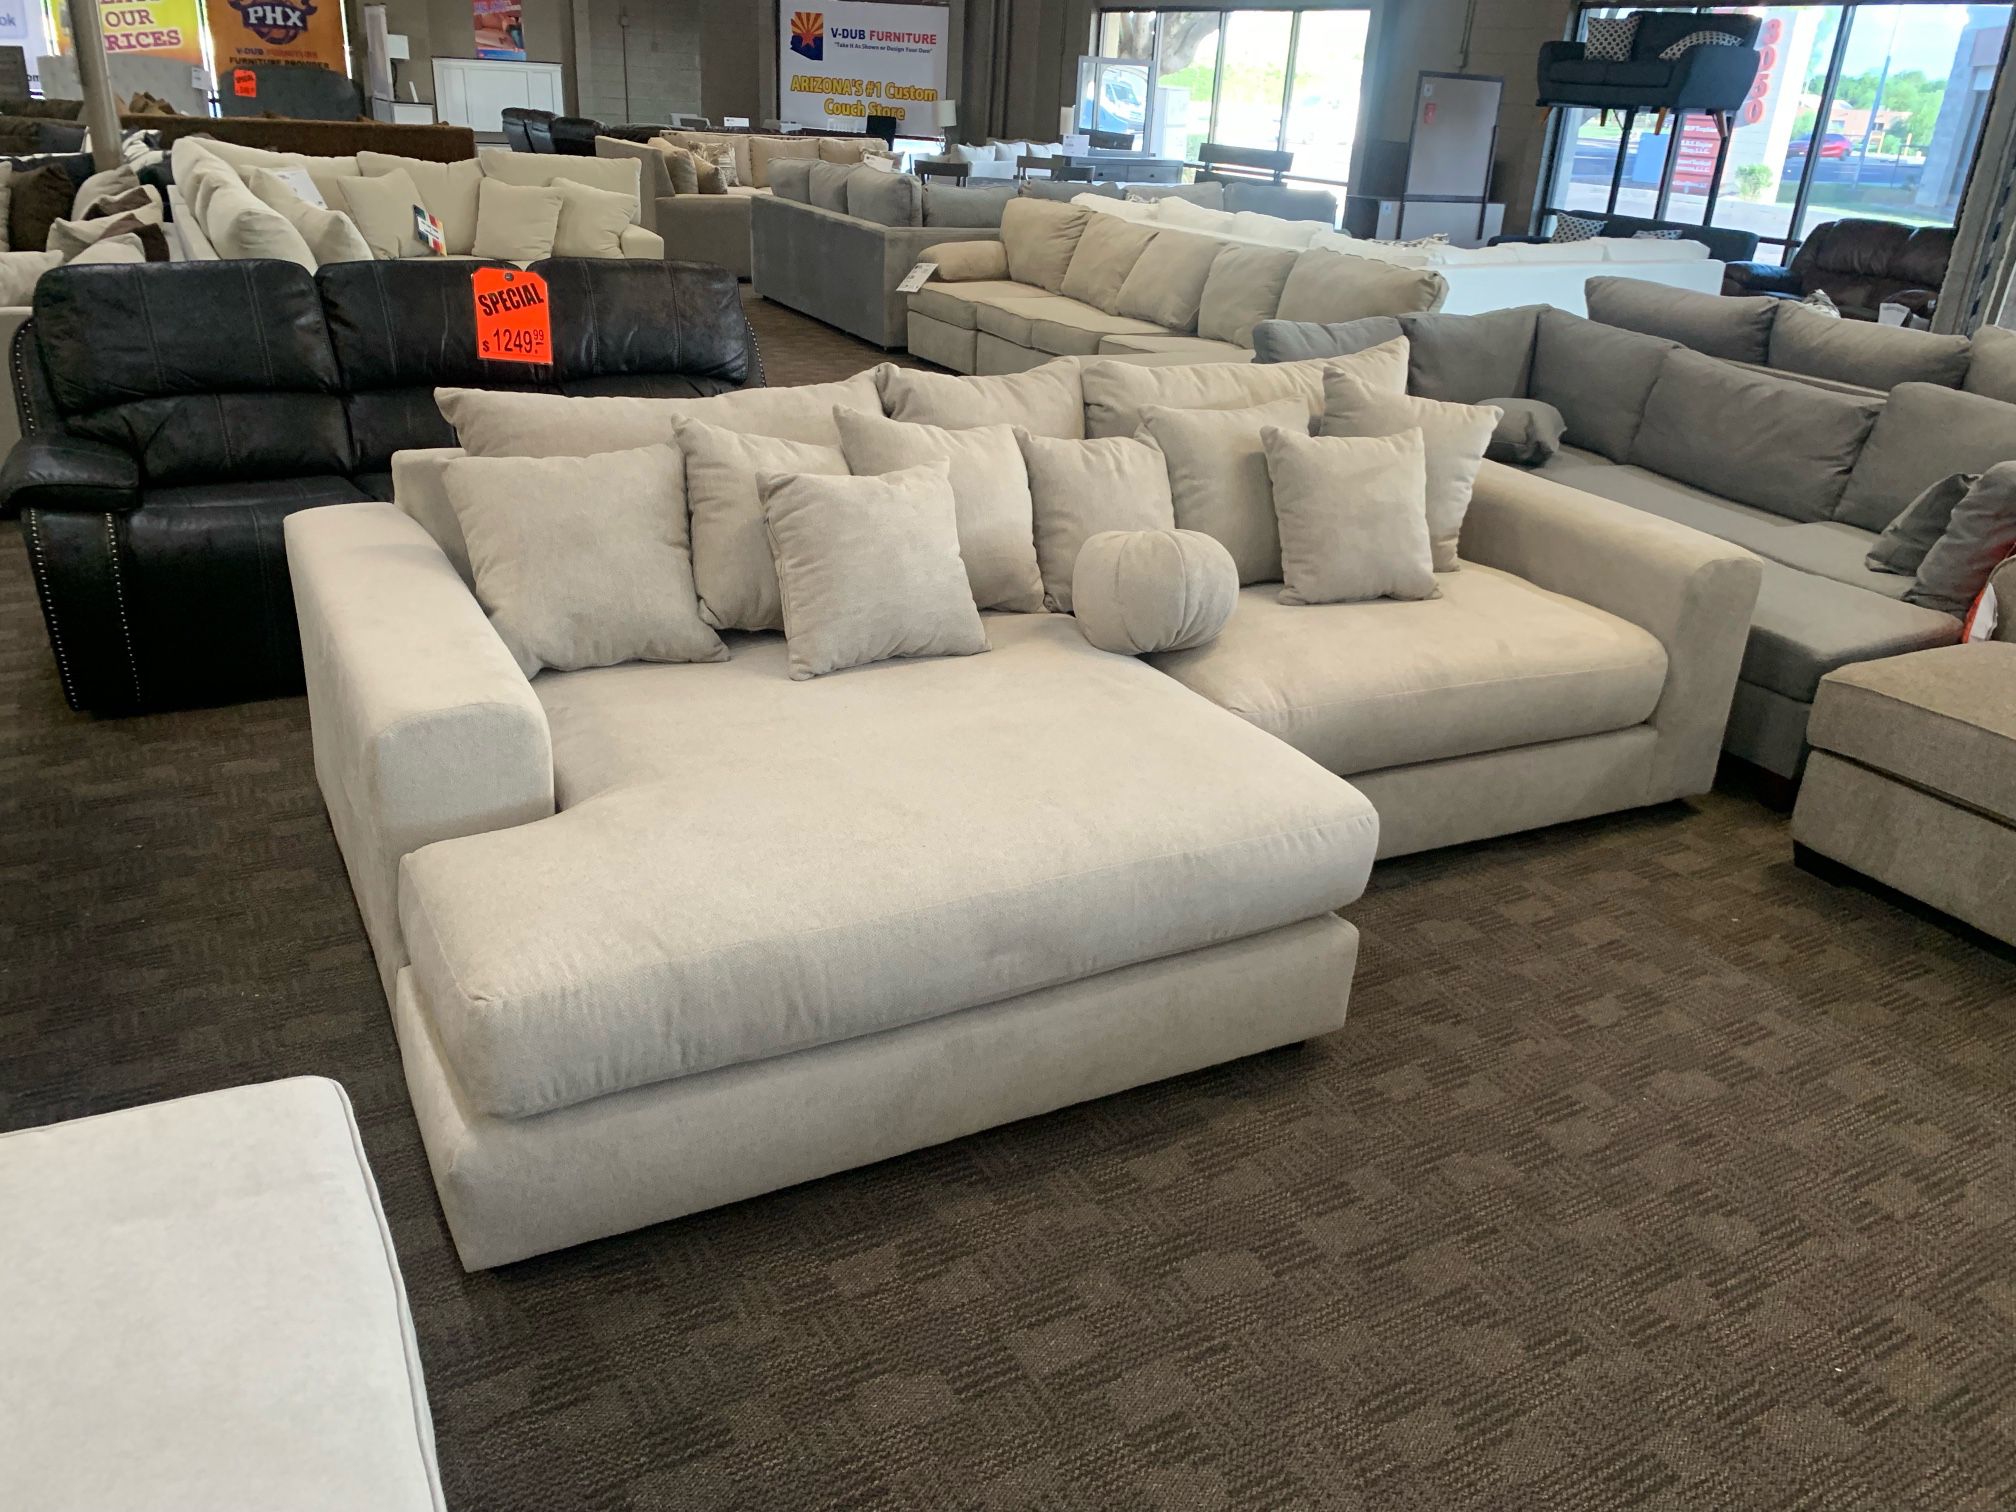 Oversized White Beige Sectional Couch